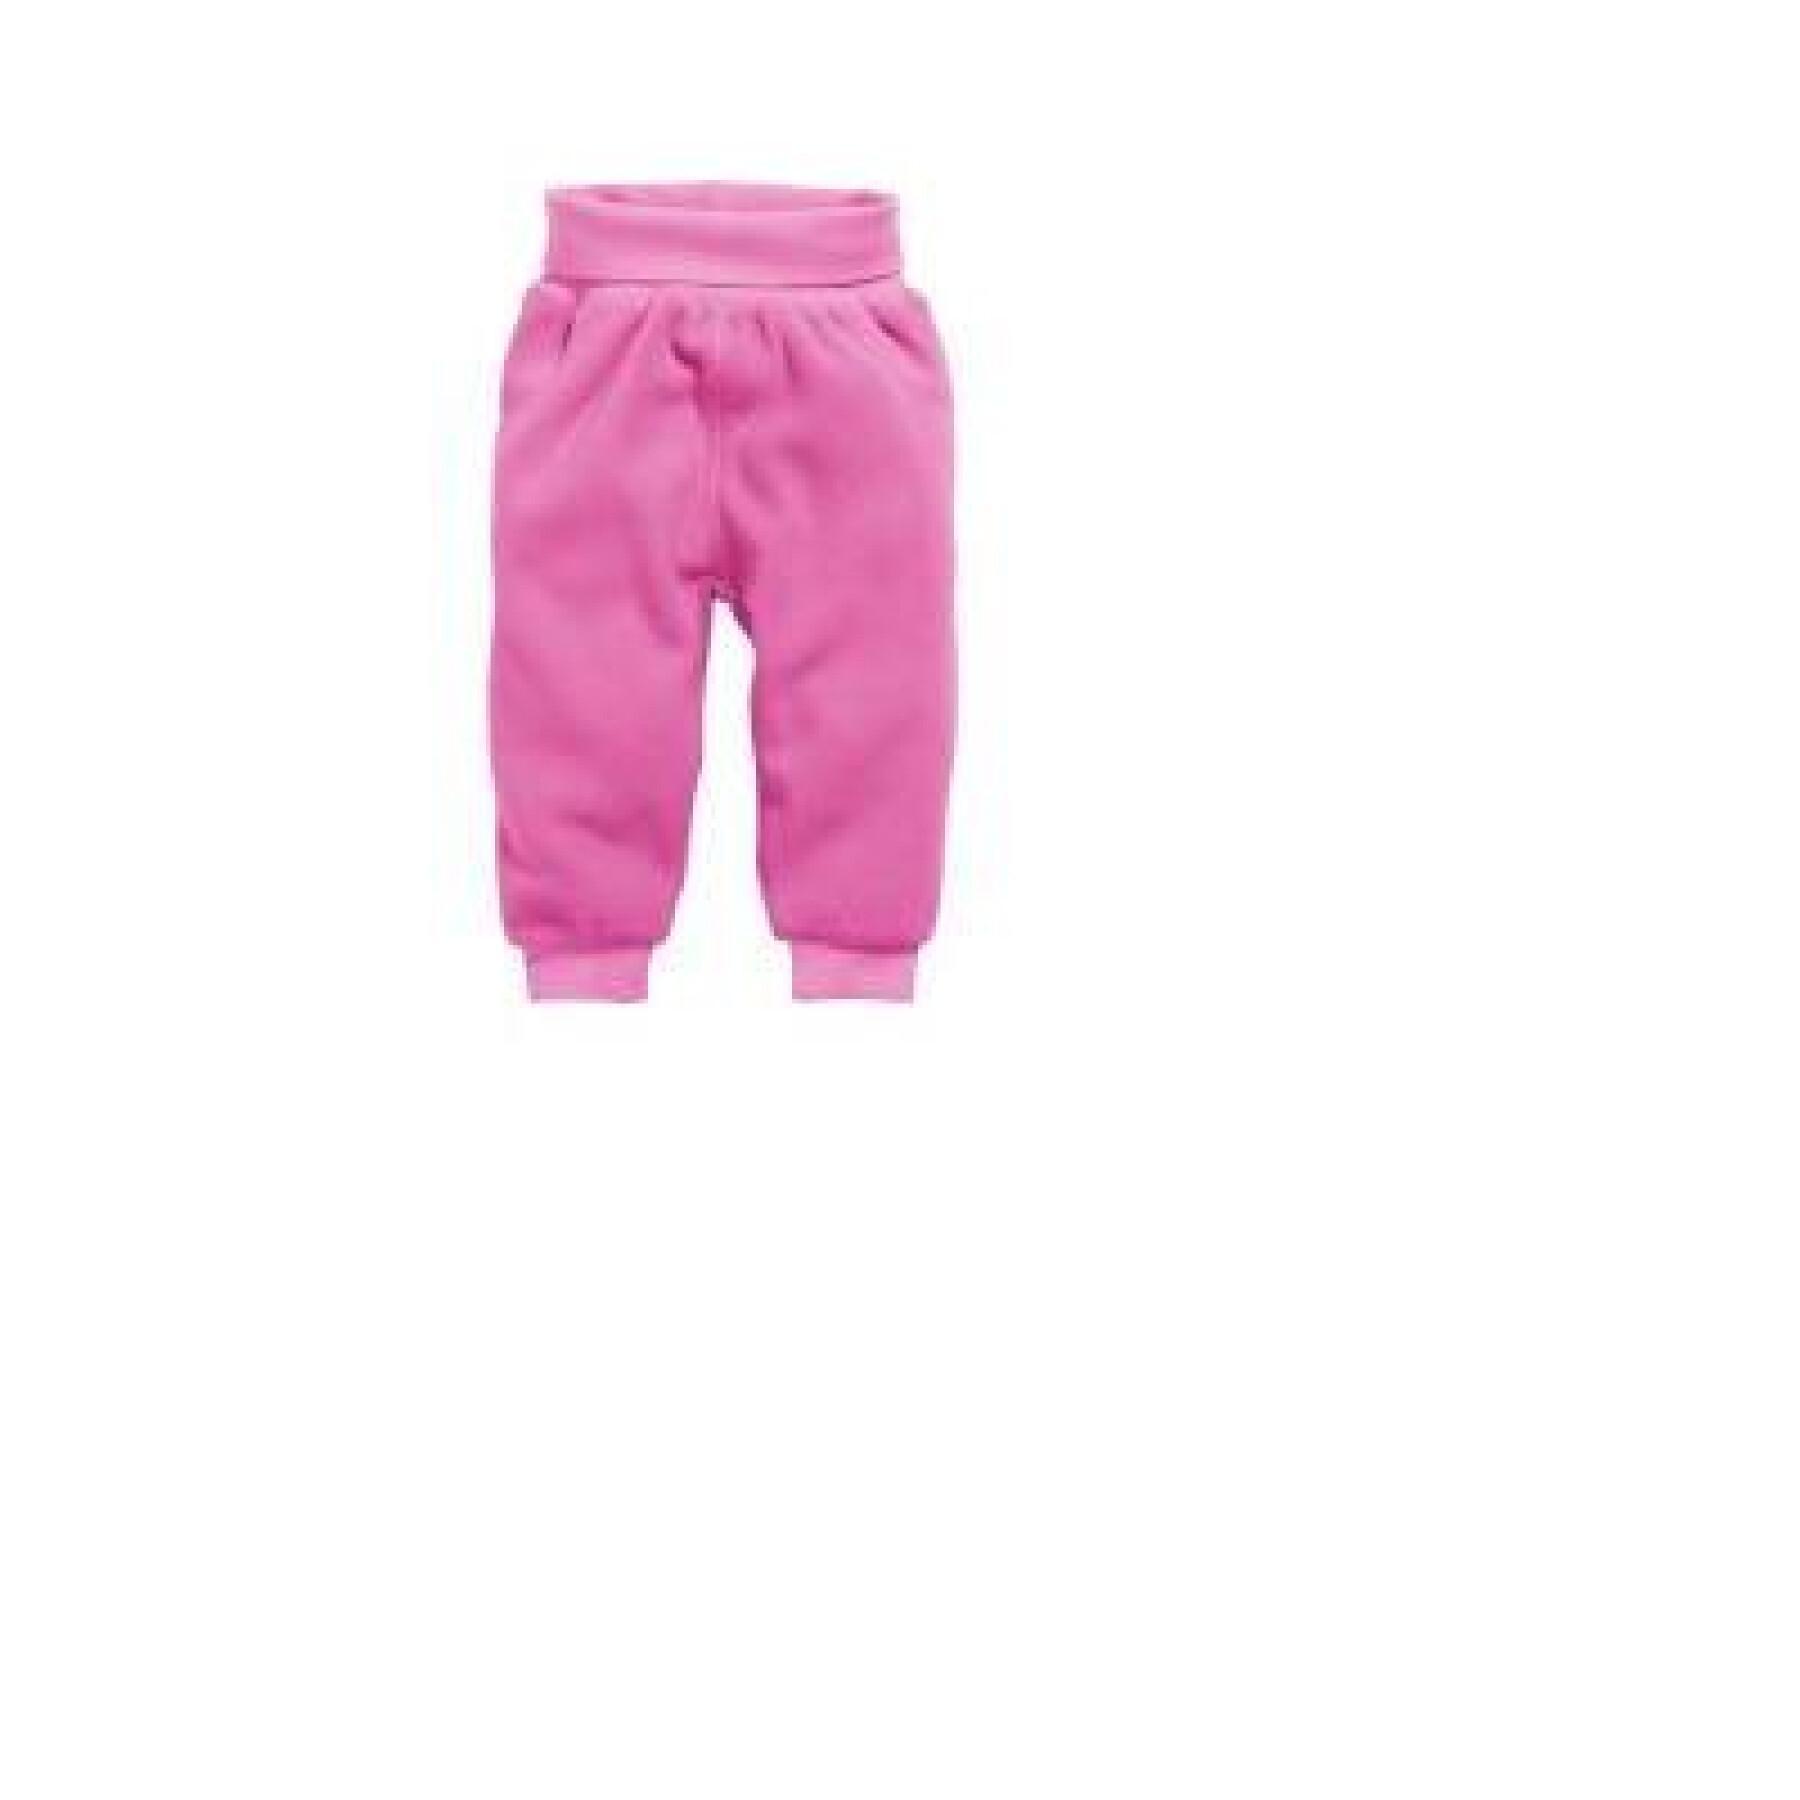 Puffy fleece jogging suit with baby knit cuffs Playshoes